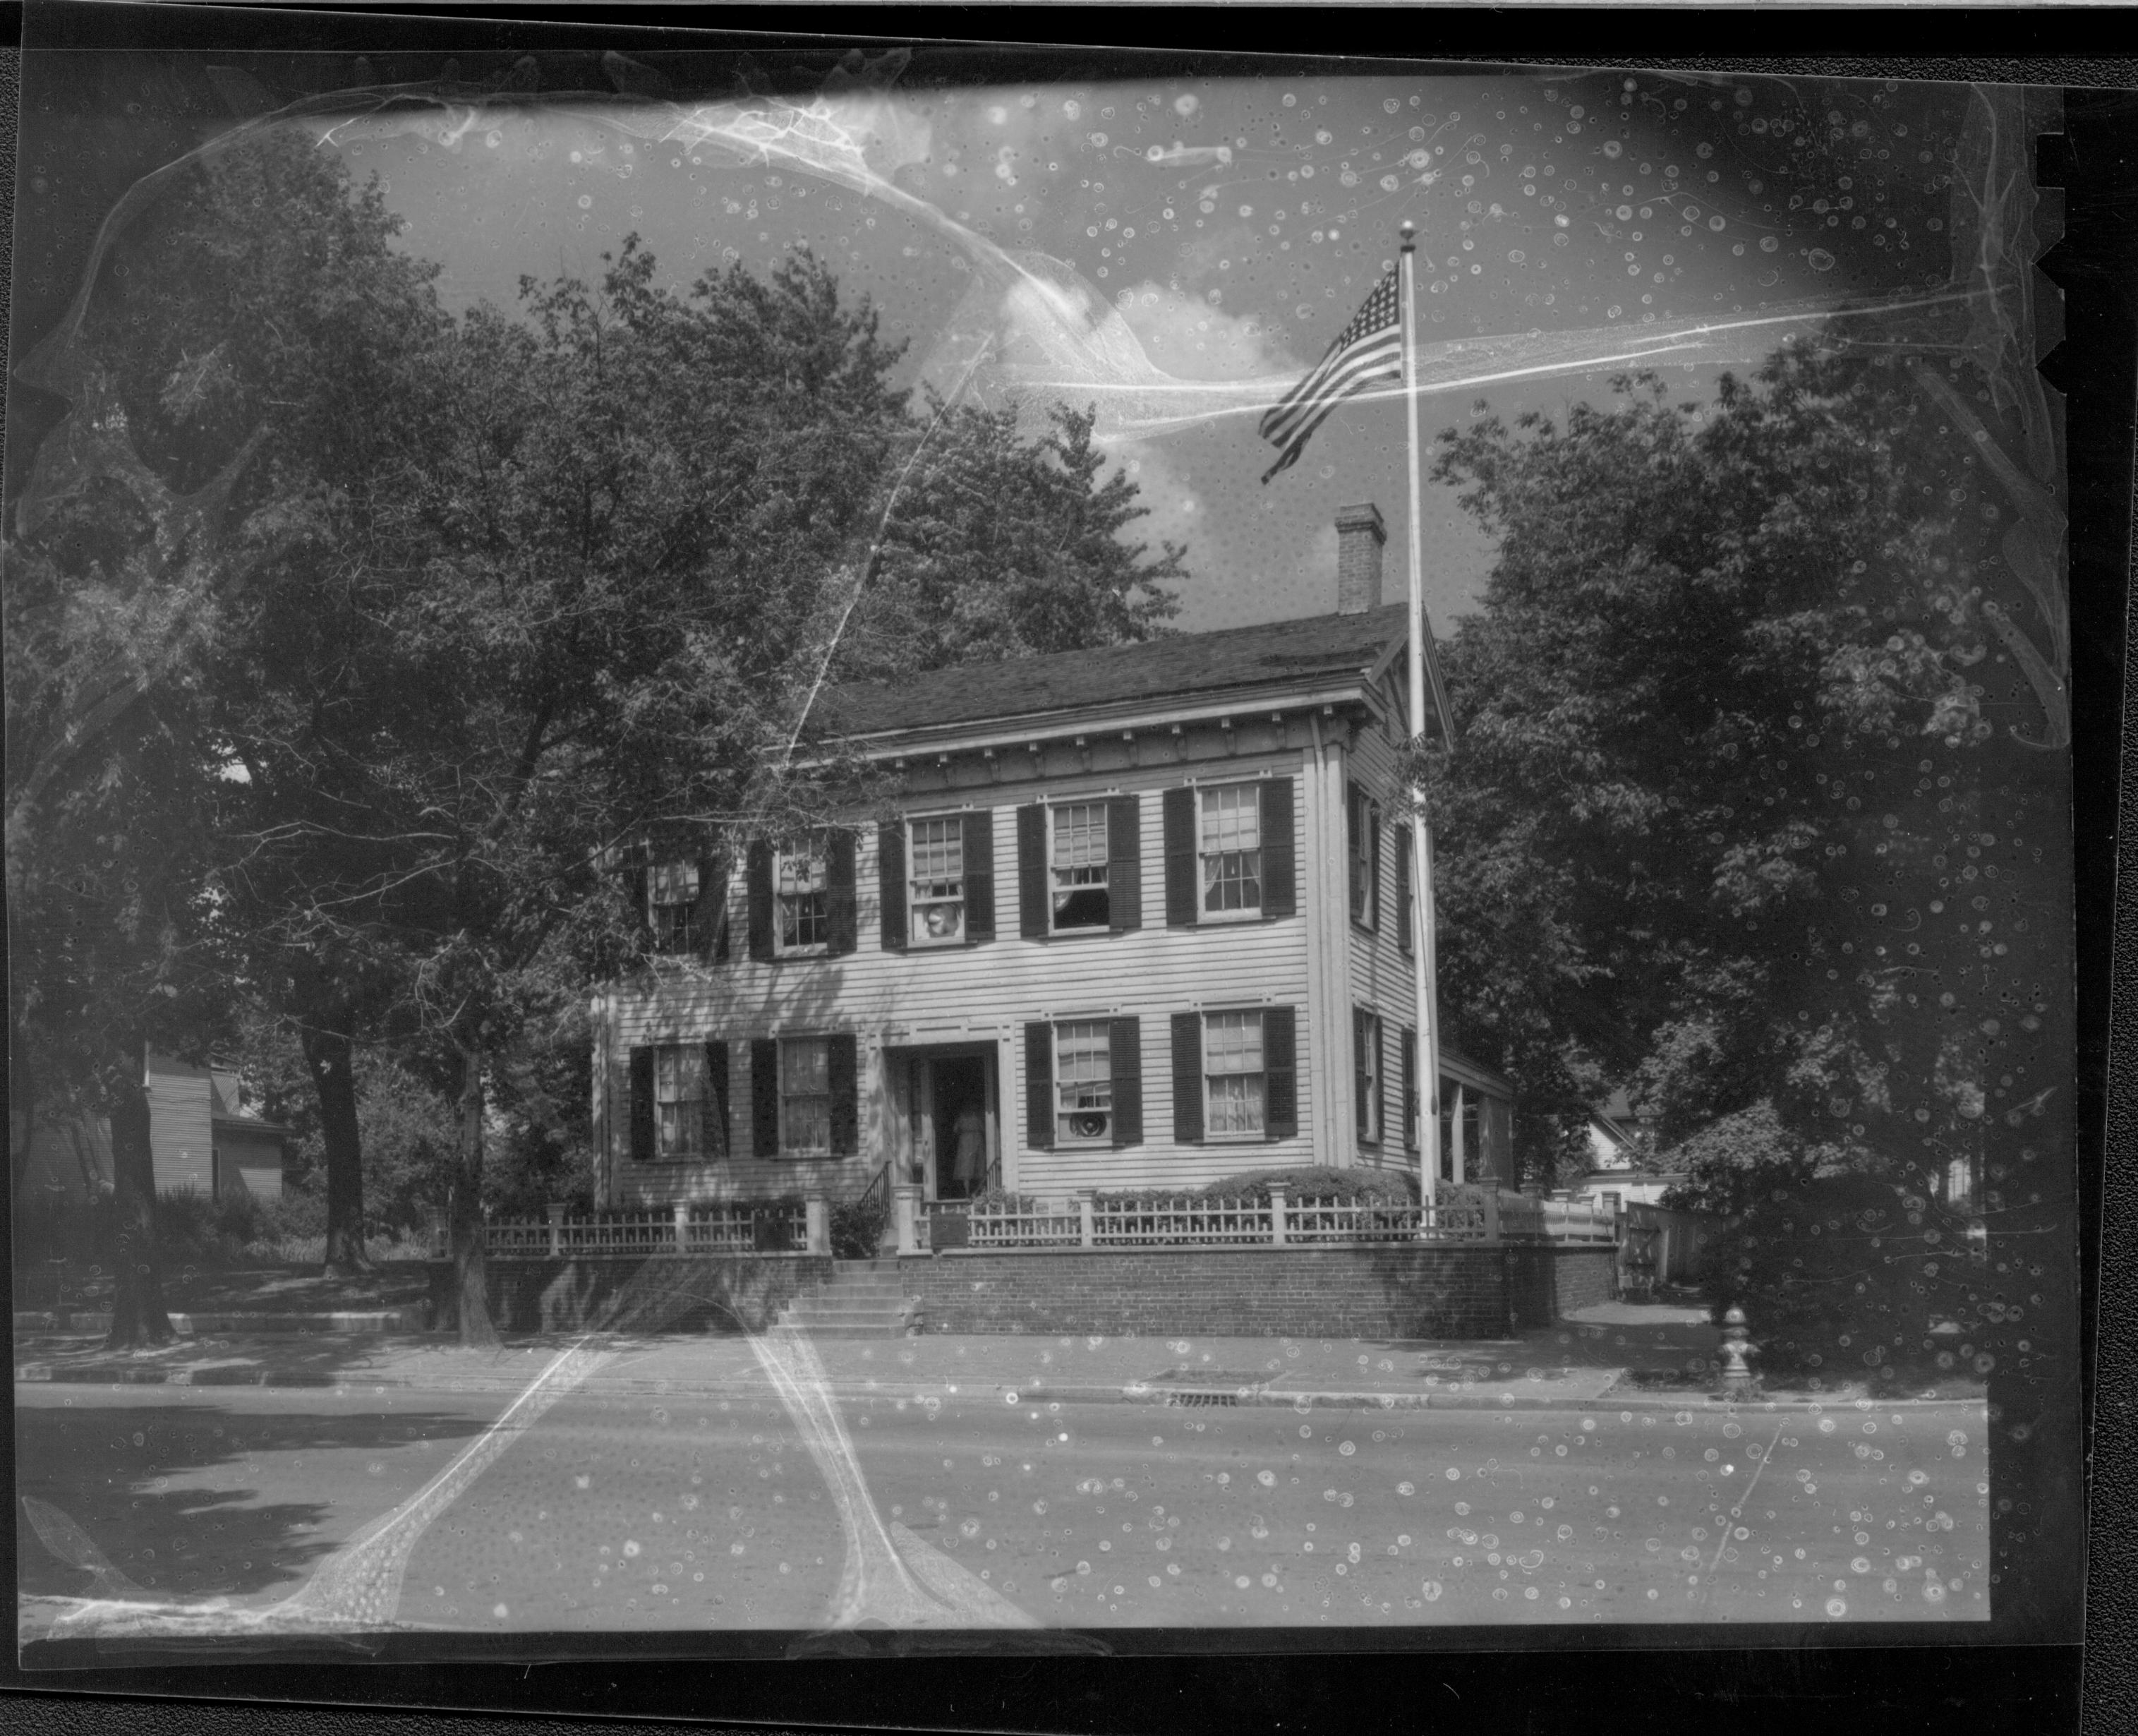 Lincoln Home west (front) elevation in summer surrounded by trees. Flag pole behind picket fence in corner, fire hydrant near street on corner.  Two story house on Bugg lot (Block 10, lot 5) on far left. House visible in far background behind Lincoln Home on Kercheval lot (Block 10, lot 9). Paved street. House appears to be painted white. Looking Northeast from 8th and Jackson Street intersection. Negative deteriorating. Lincoln Home, flagpole, fire hydrant, paved street, painted white, 8th Street, Bugg, Kercheval